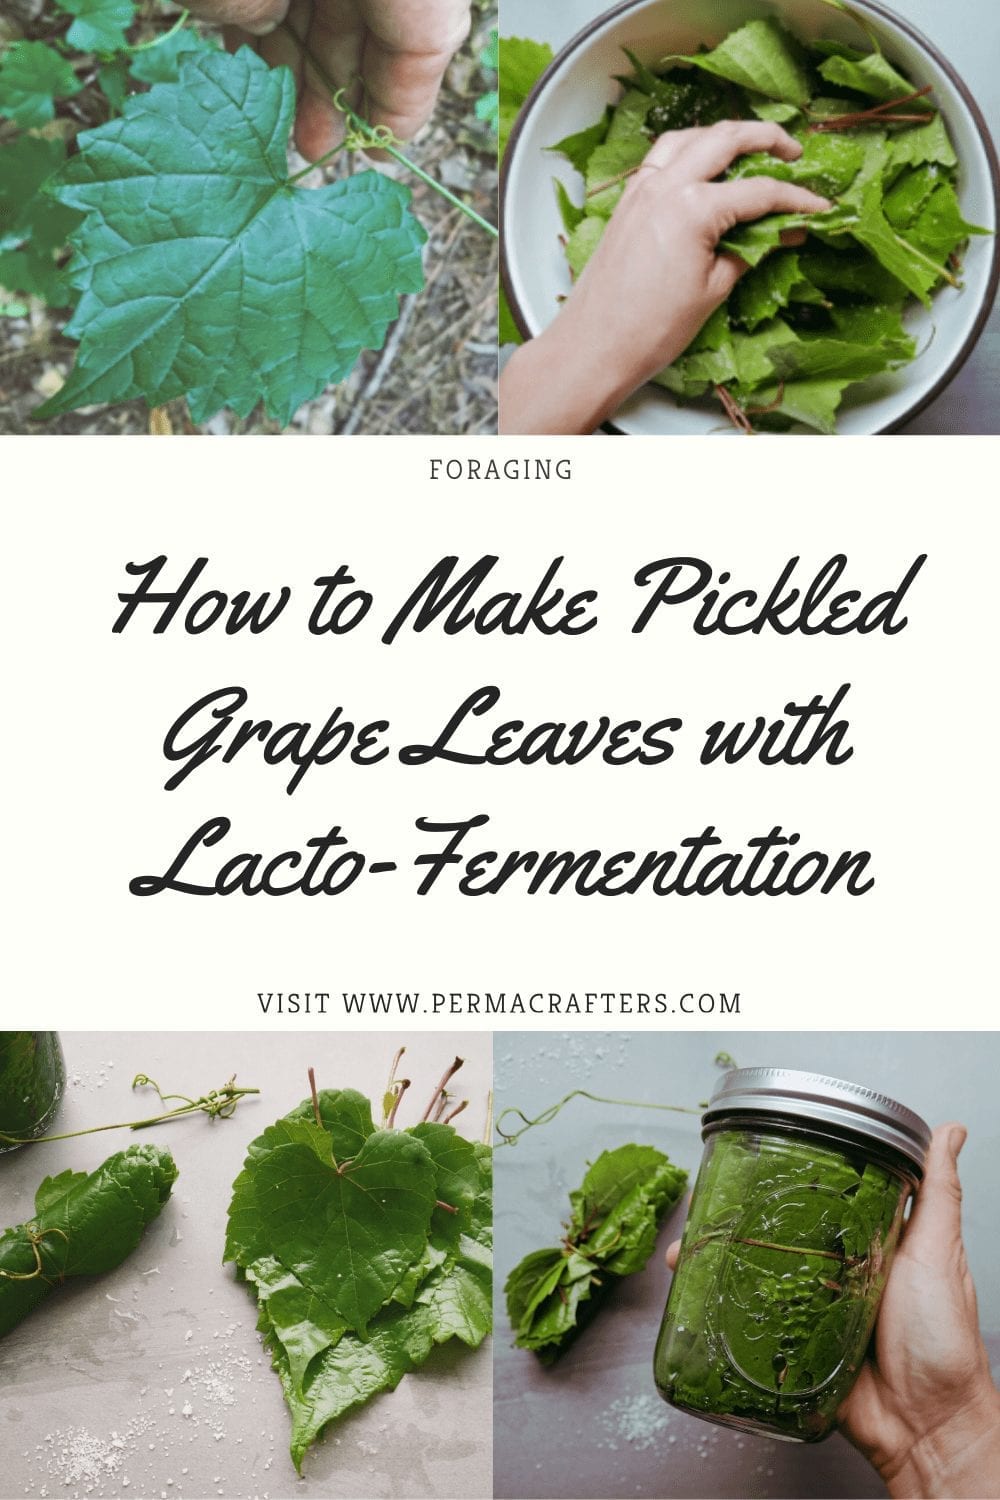 How to Make Pickled Grape Leaves with Lacto-Fermentation